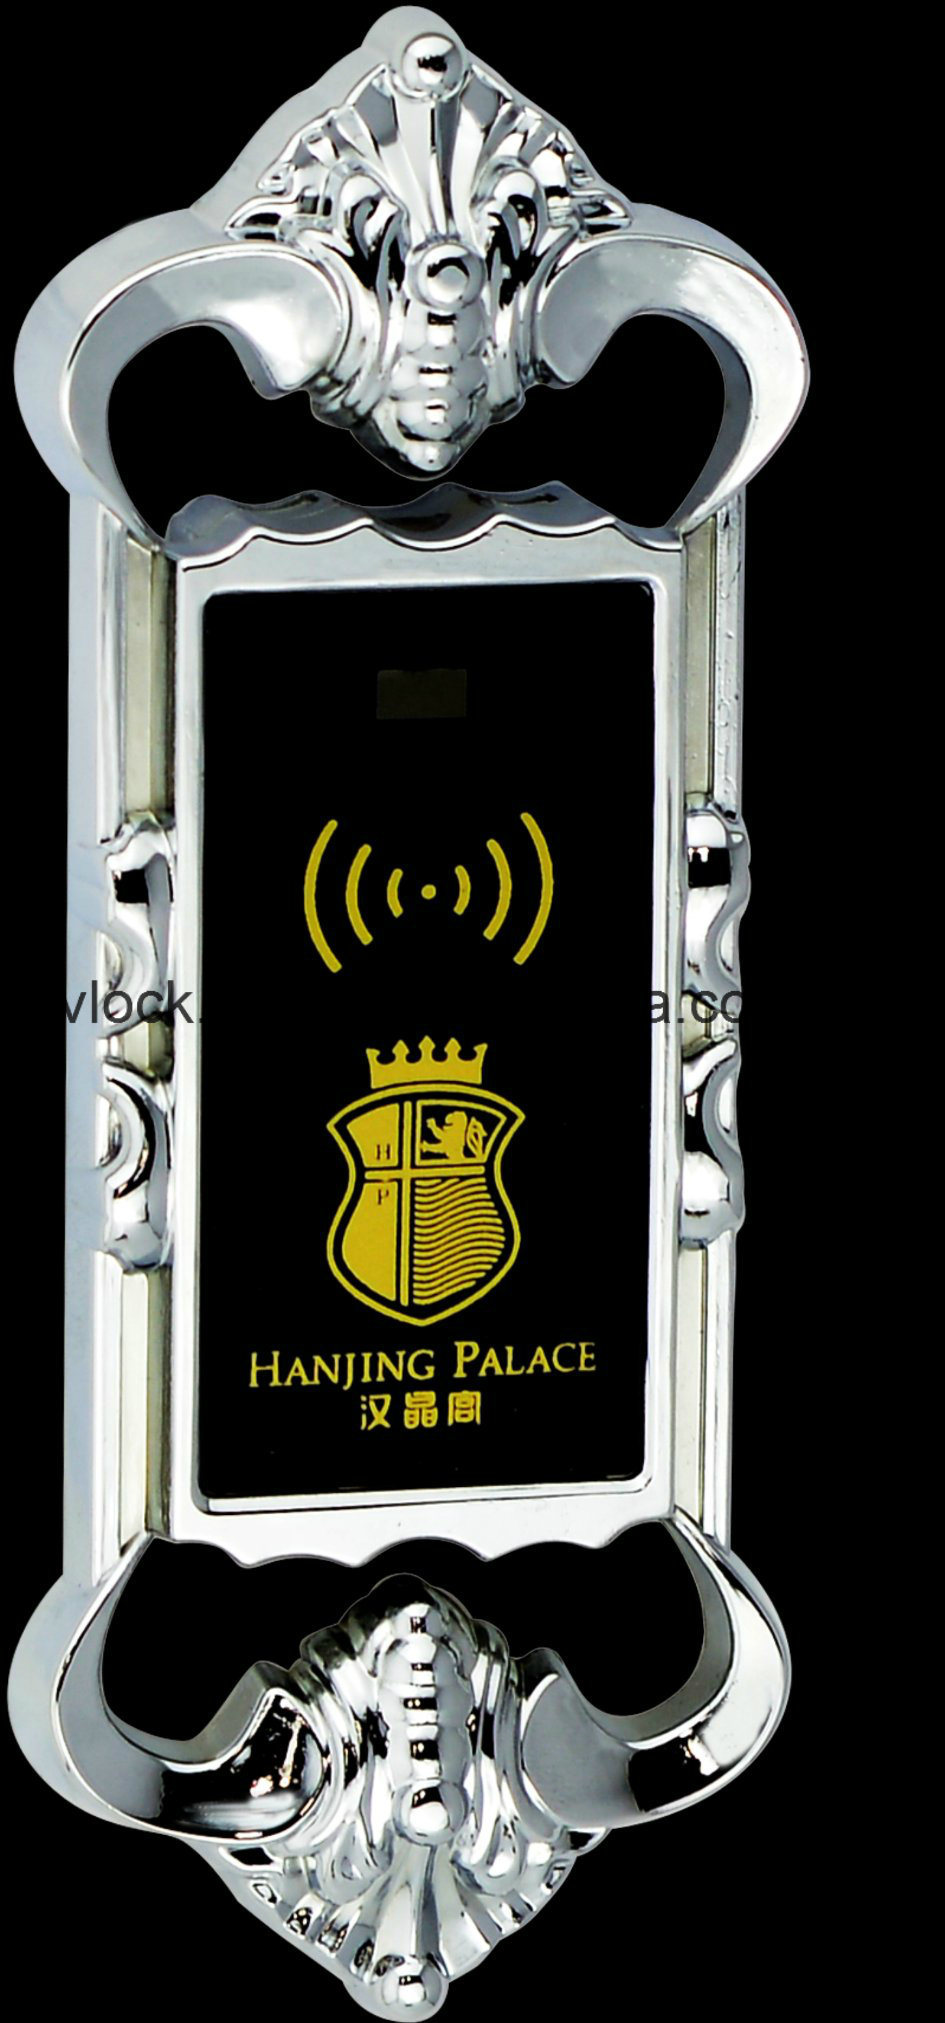 Historied Style, Popular in Cabinet Market with Good Quanlity Locker Lock